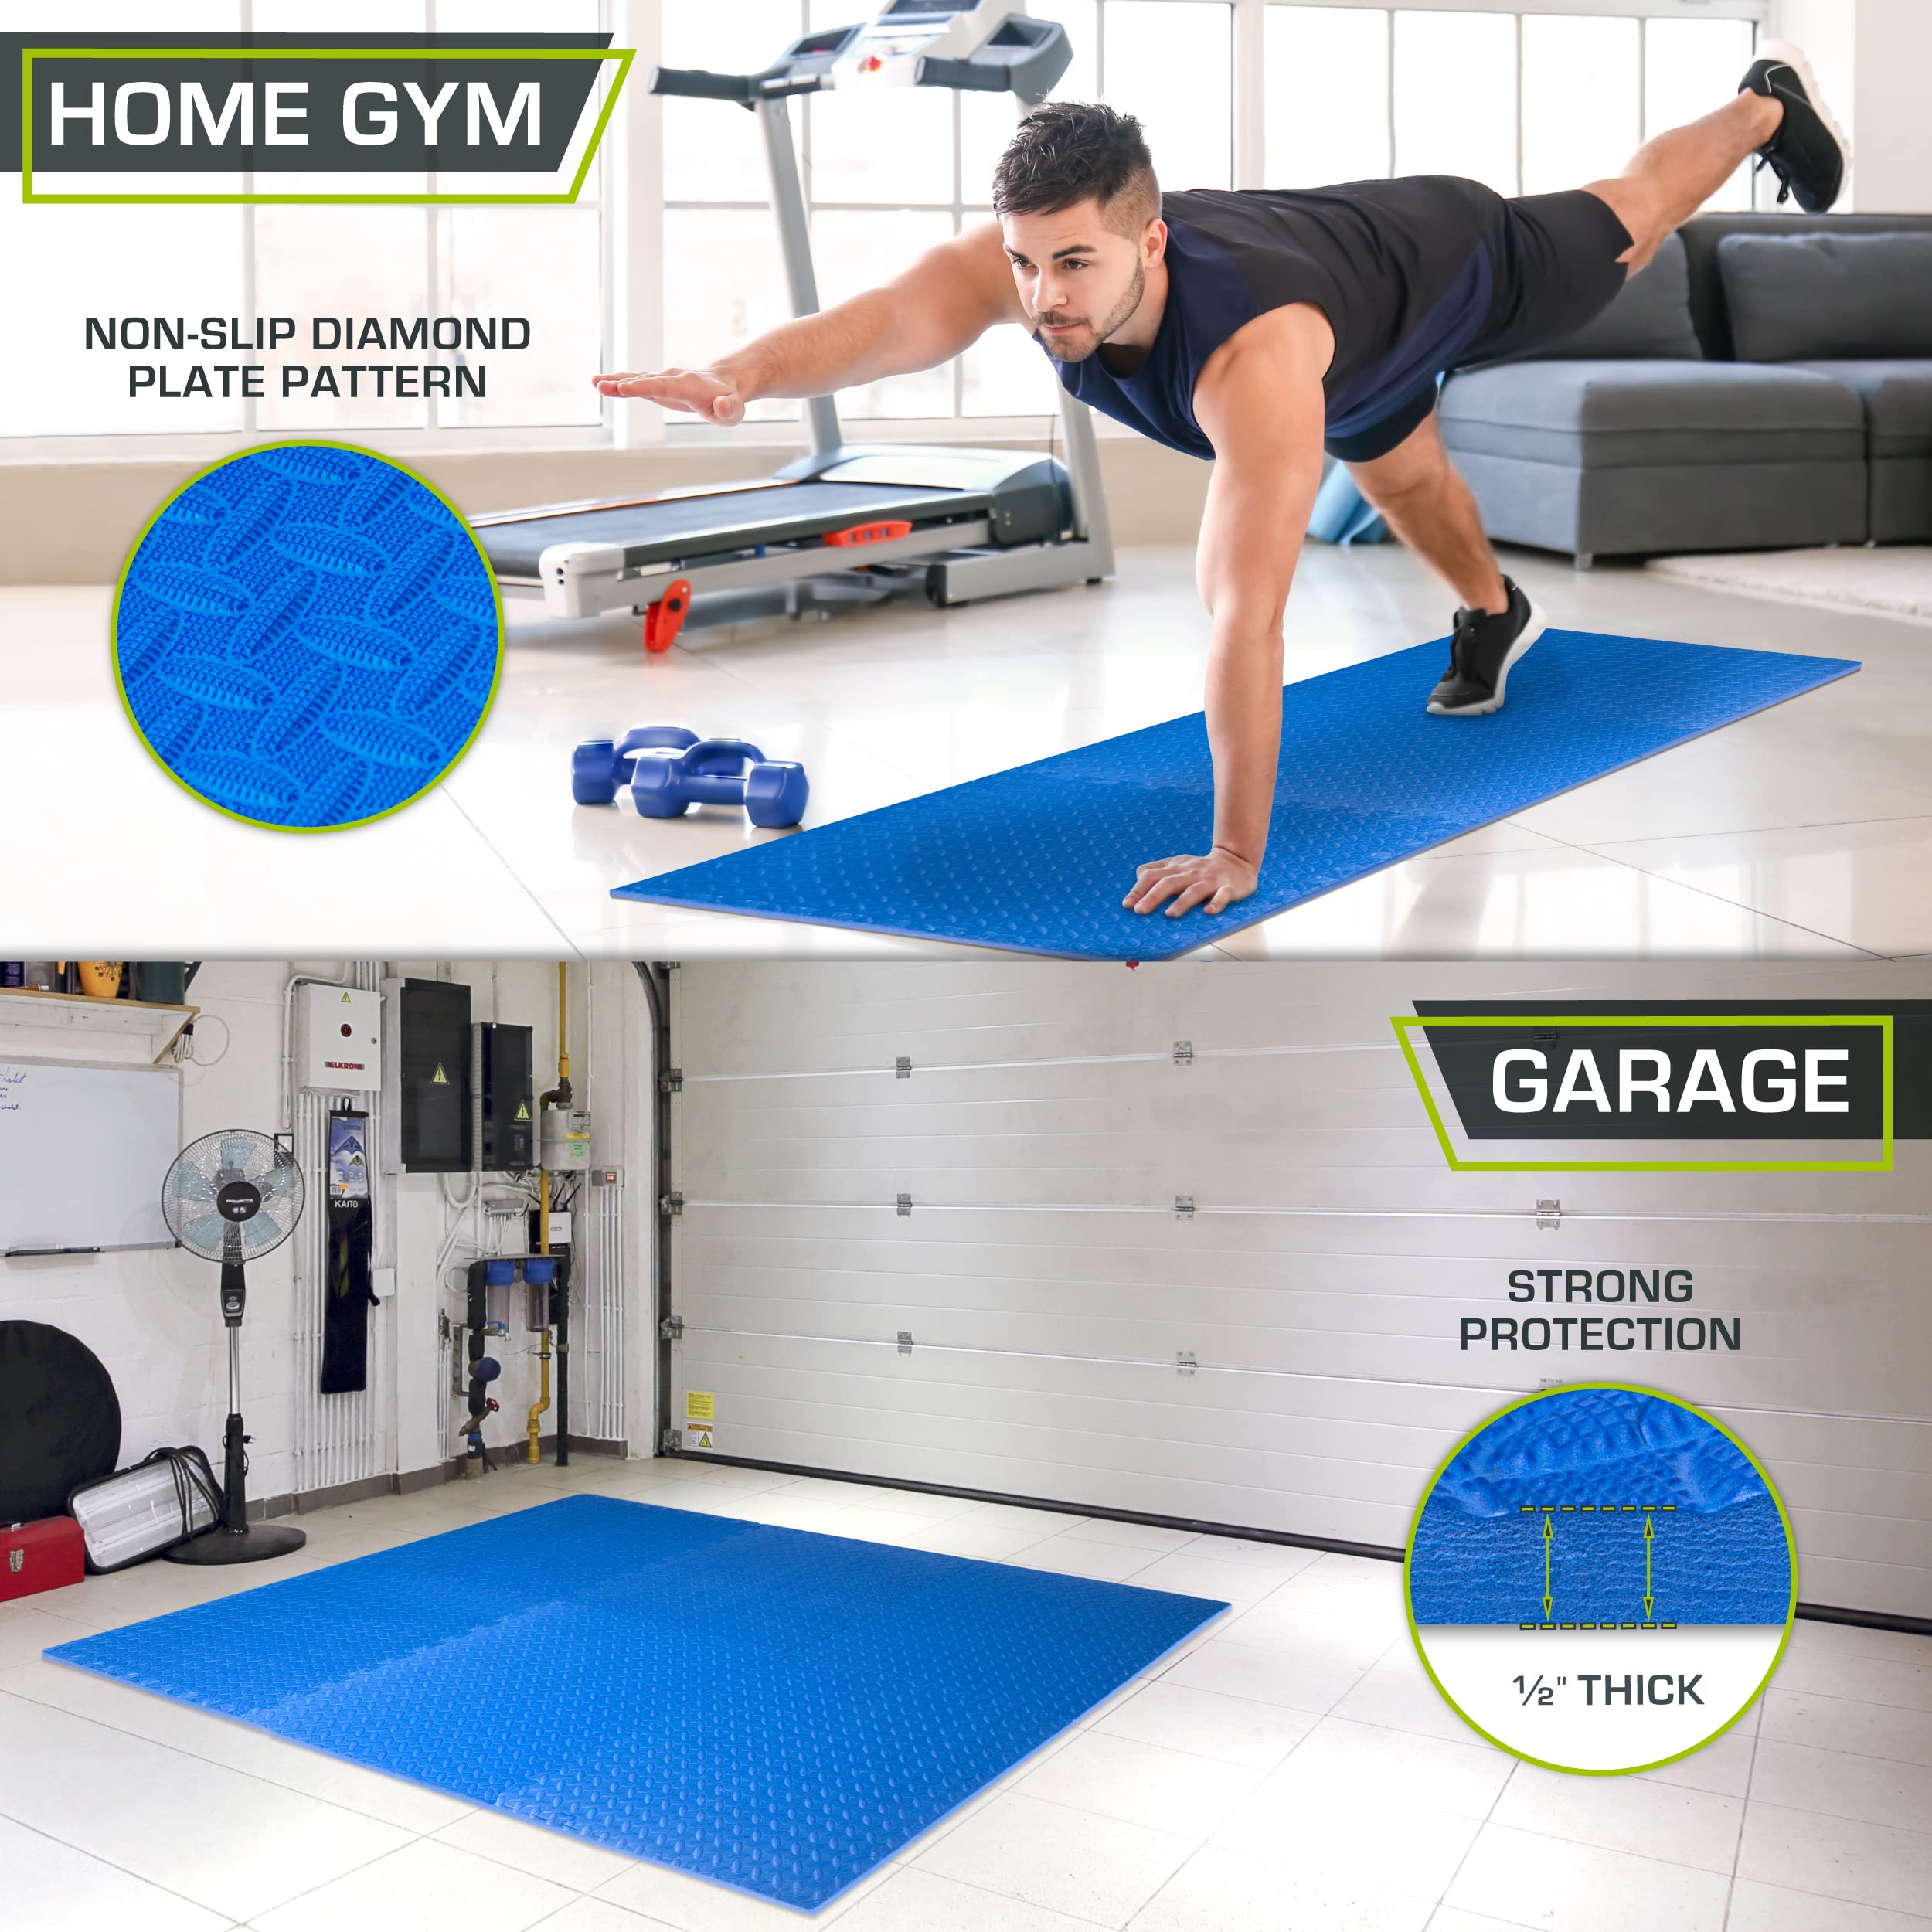 ProsourceFit Puzzle Exercise Mat ½”, EVA Interlocking Foam Floor Tiles for Home Gym, Mat for Home Workout Equipment, Floor Padding for Kids, Available in Packs of 24 SQ FT, 48 SQ FT, 144 SQ FT